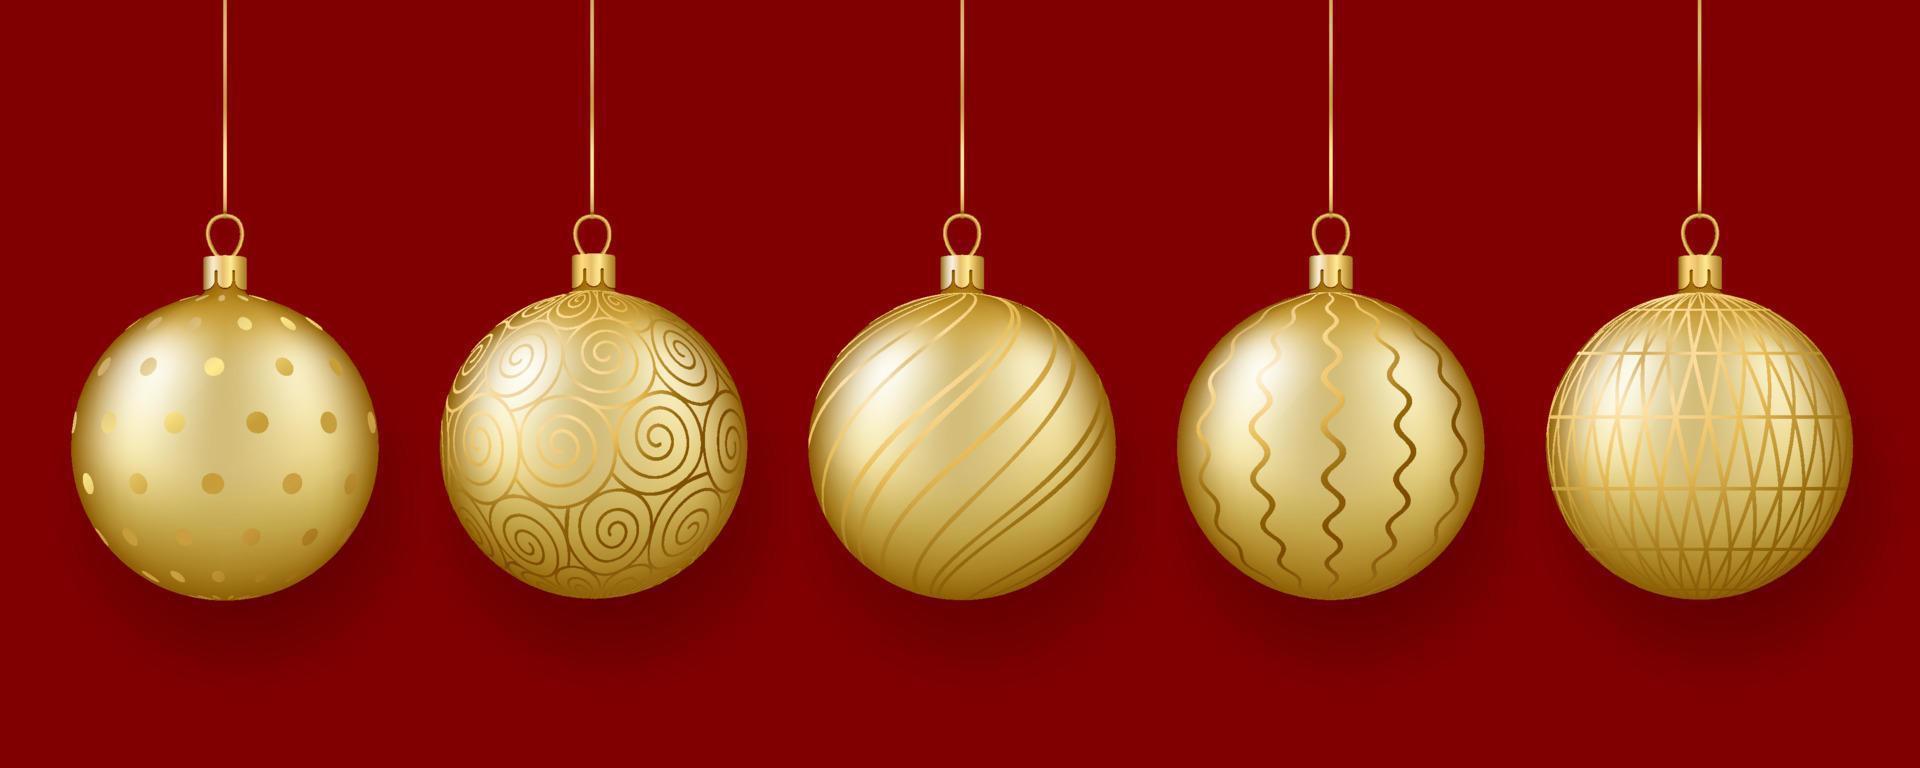 Christmas and New Year decor. Set of gold glass balls with ornament. vector